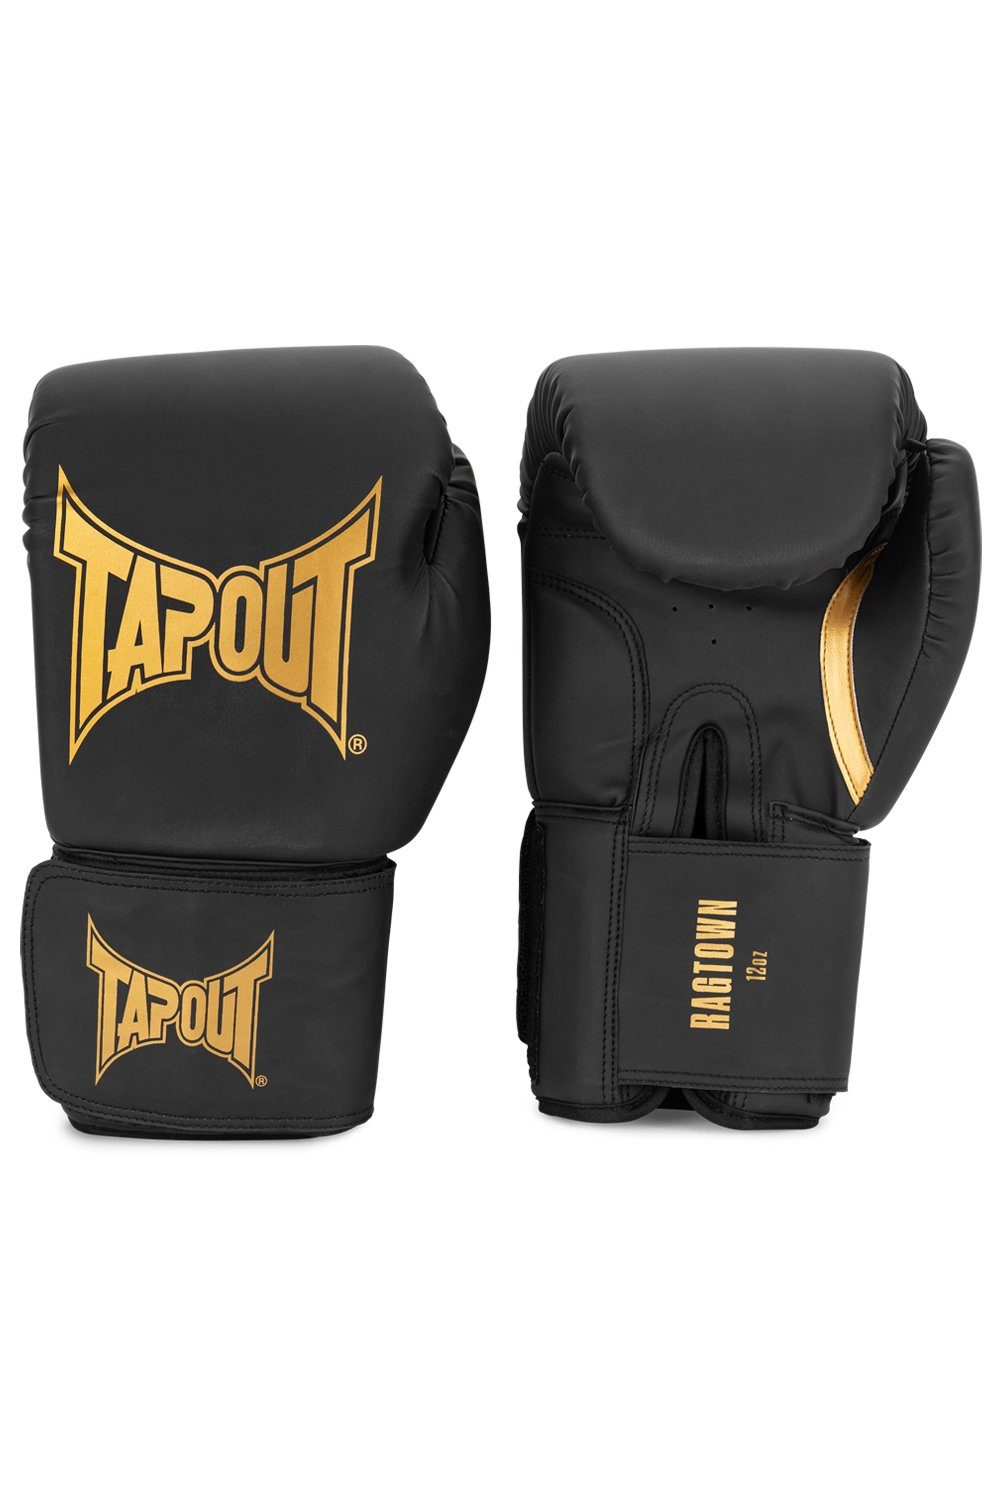 TAPOUT Boxhandschuhe RAGTOWN